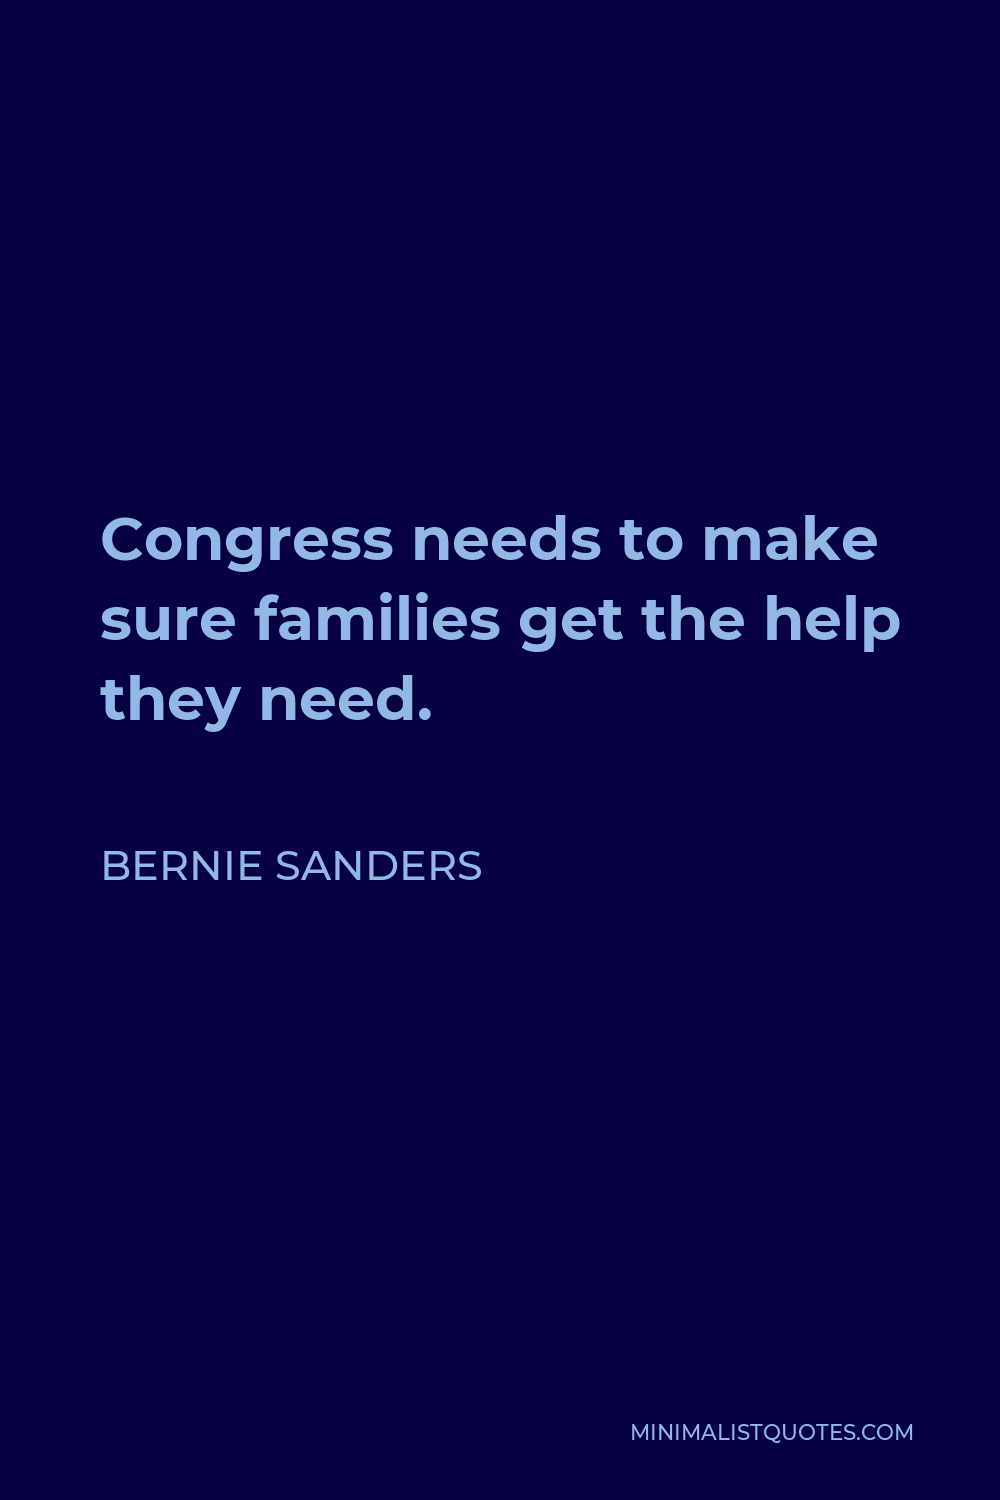 Bernie Sanders Quote - Congress needs to make sure families get the help they need.